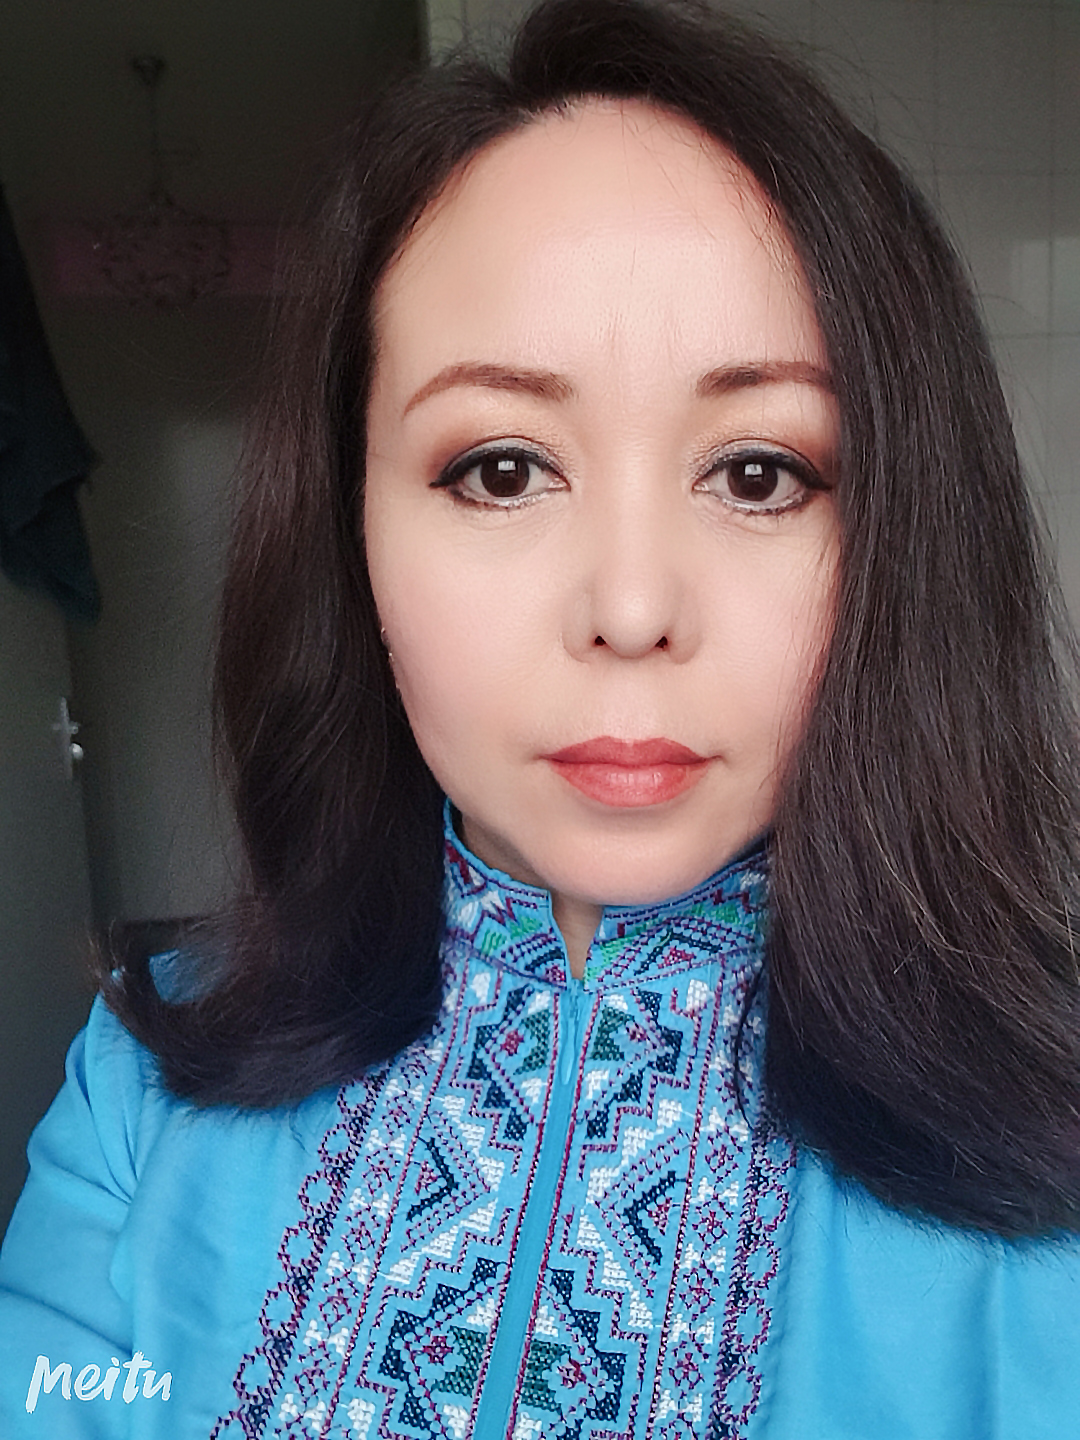 Former journalist Asiye Abdulaheb was born in Urumqi, the capital city of Xinjiang. She fled to the Netherlands in 2009 and remains in hiding from the Chinese government (photo: Asiye Abdulaheb)(photo: Asiye Abdulaheb)